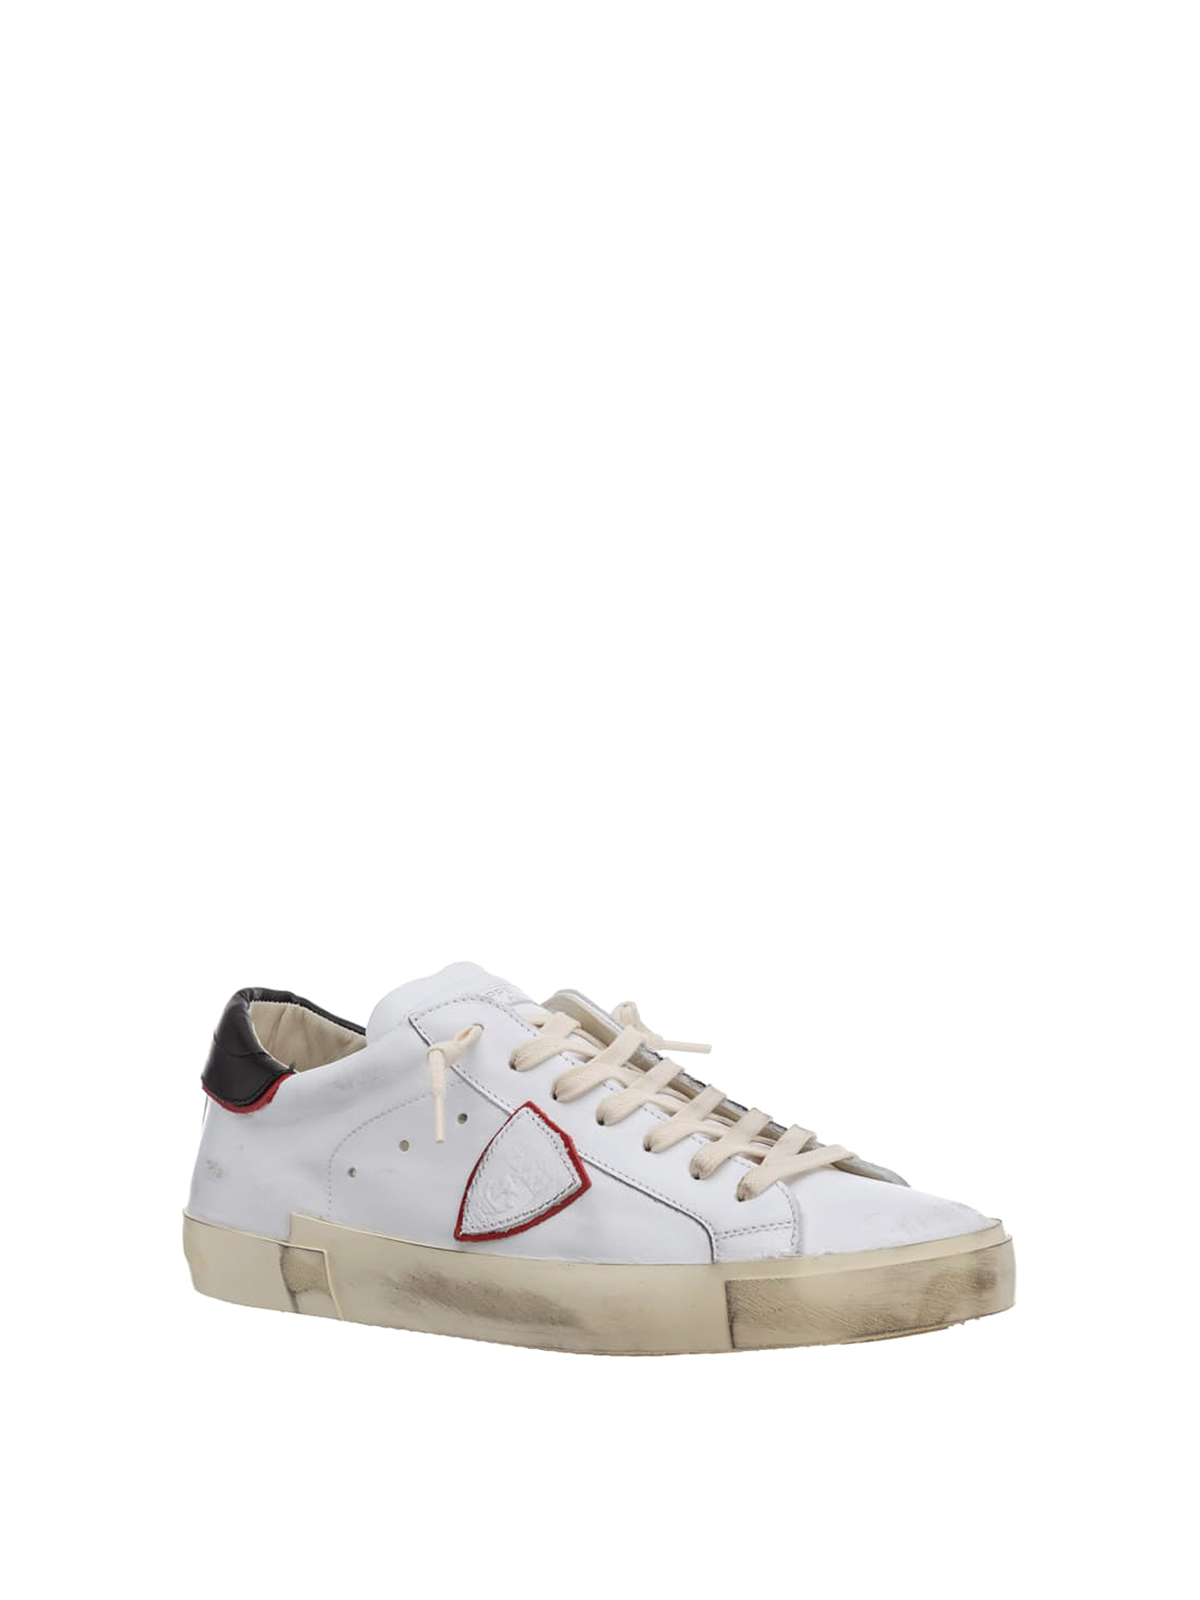 Philippe Model - Prsx Veau sneakers - trainers - PRLUV024 | iKRIX.com